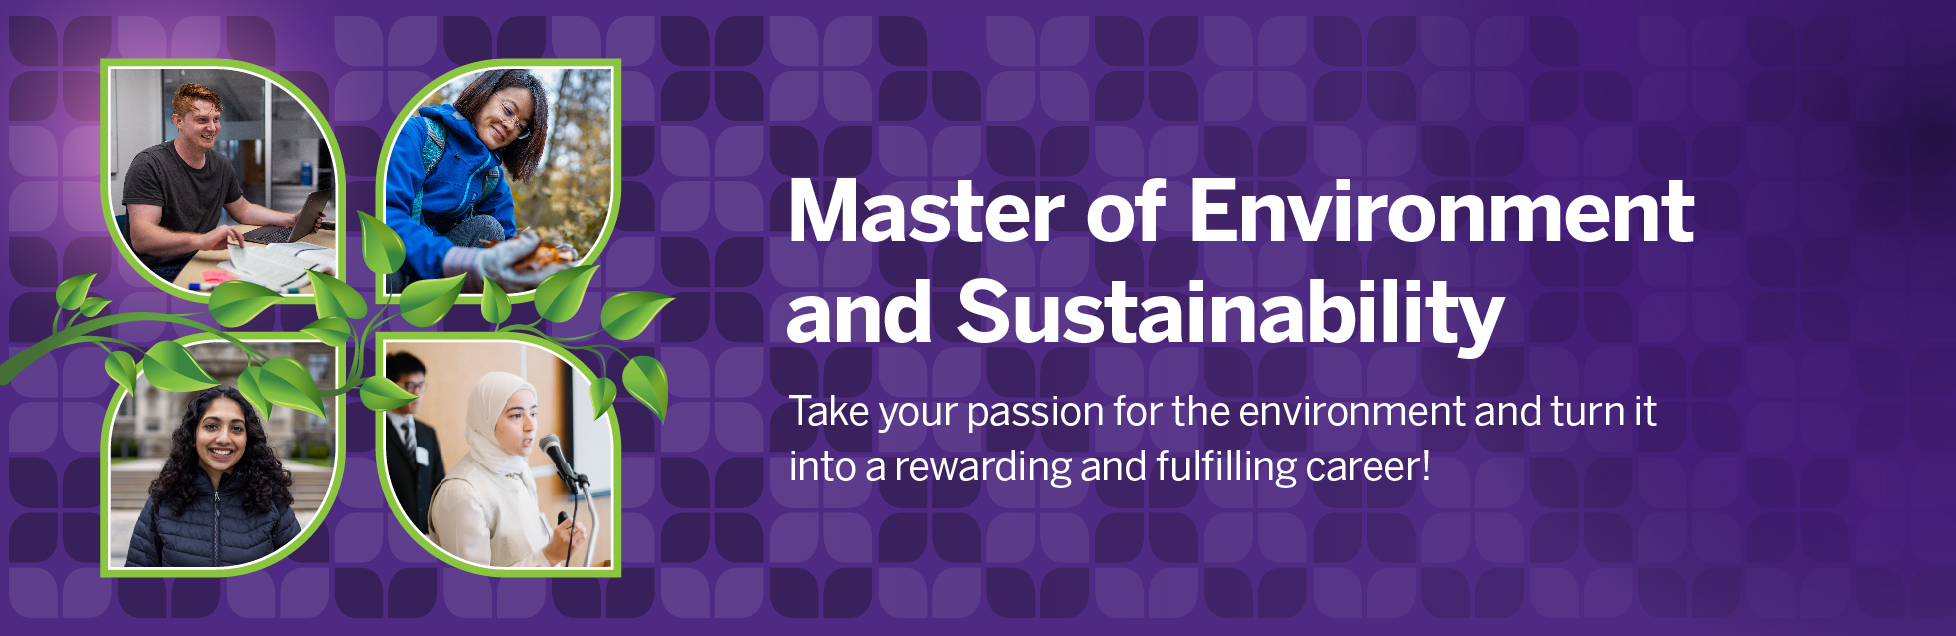 Masters of Environment and Sustainability